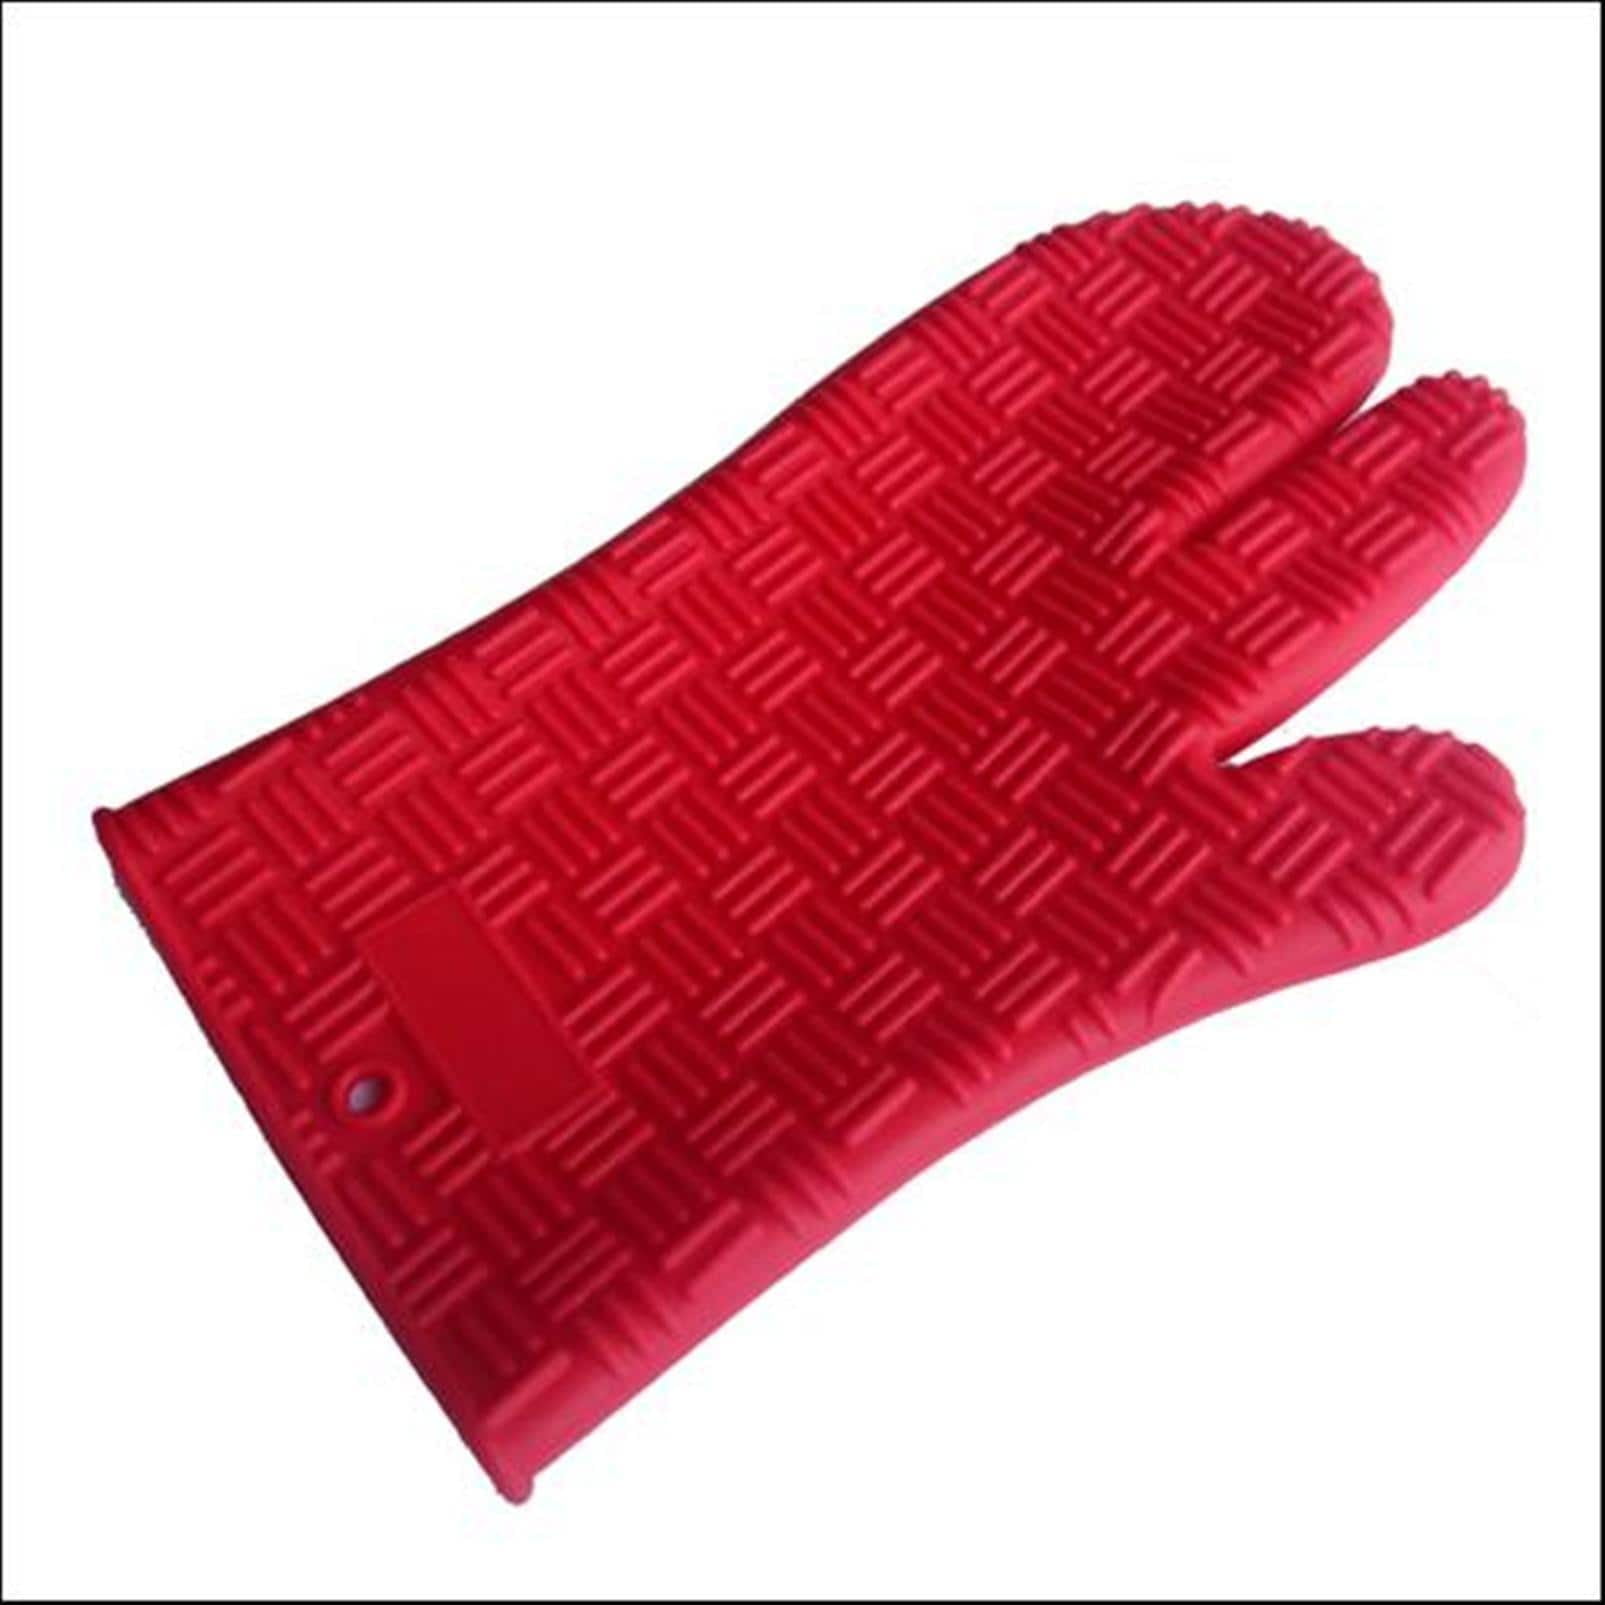 Best oven gloves: Novelty, double and silicone designs